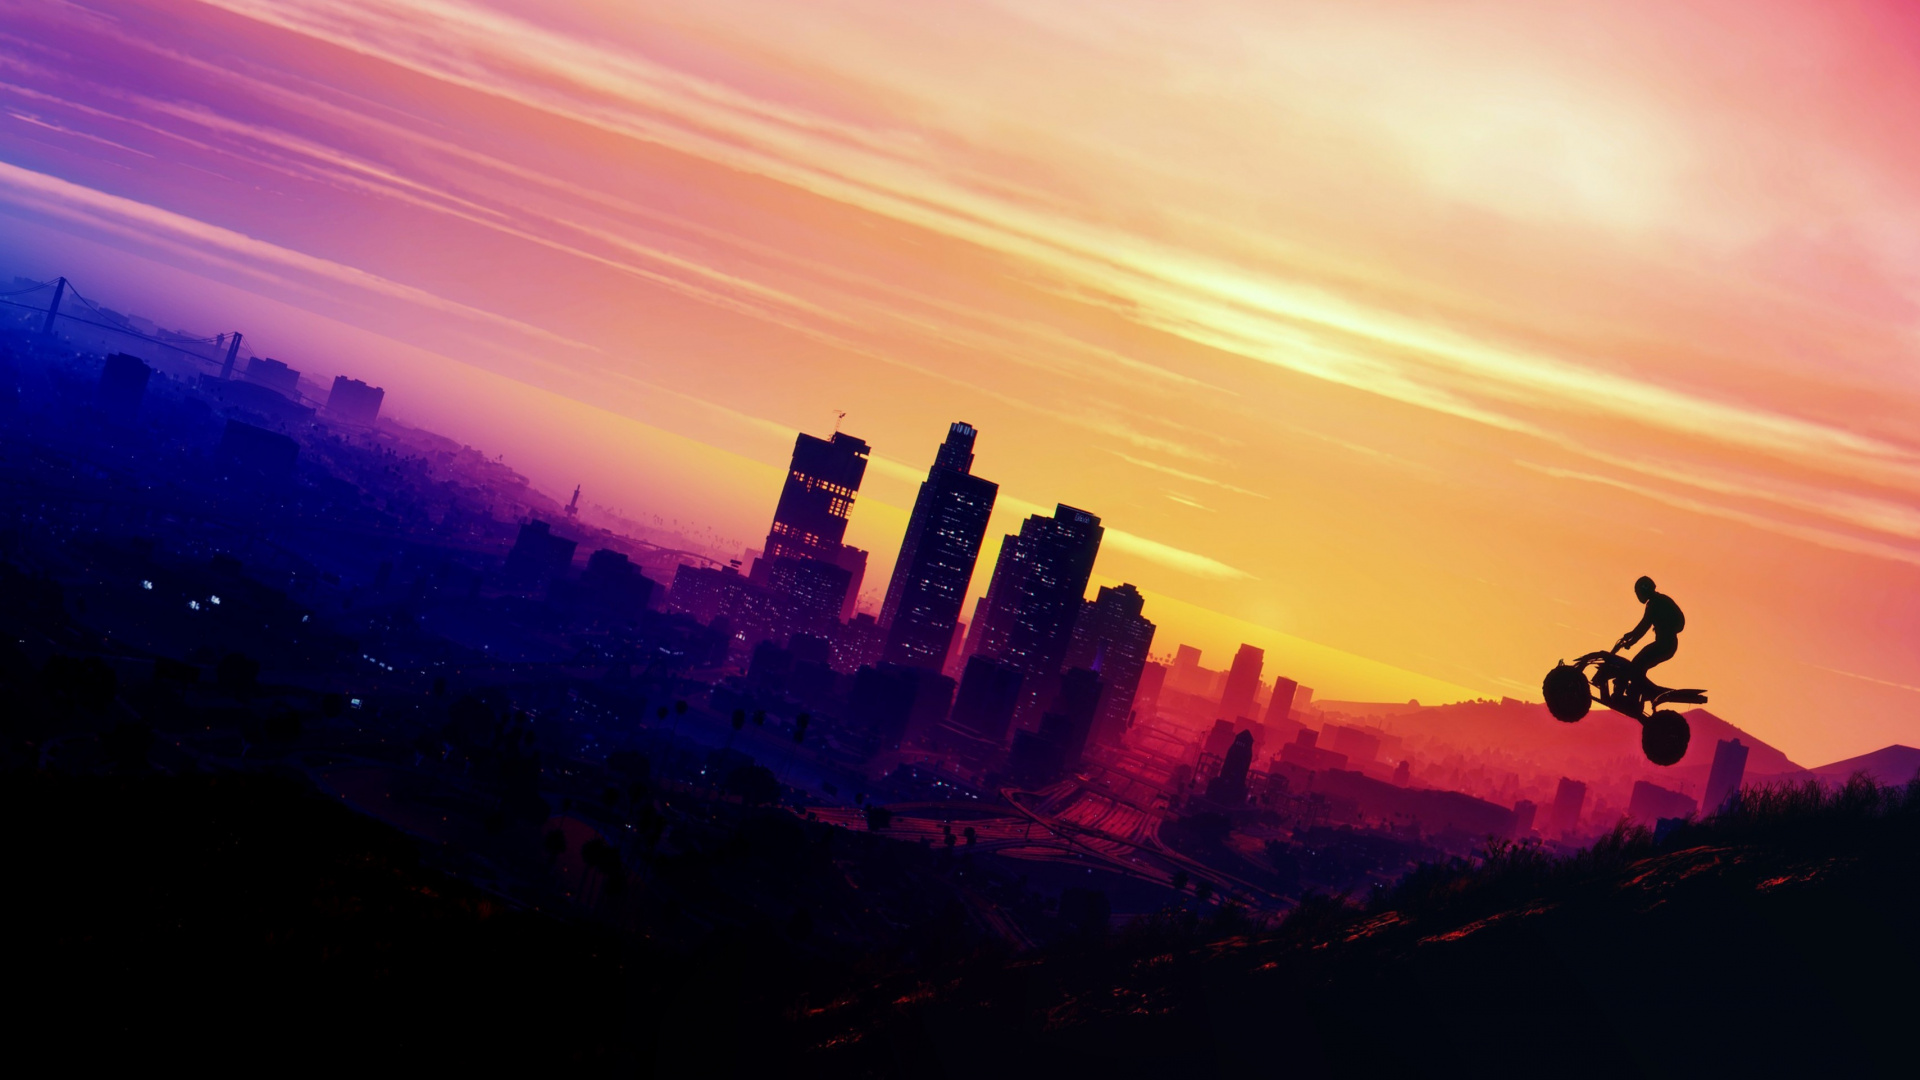 Grand Theft Auto v, Grand Theft Auto San Andreas, Horizont, Afterglow, Sonnenuntergang. Wallpaper in 1920x1080 Resolution